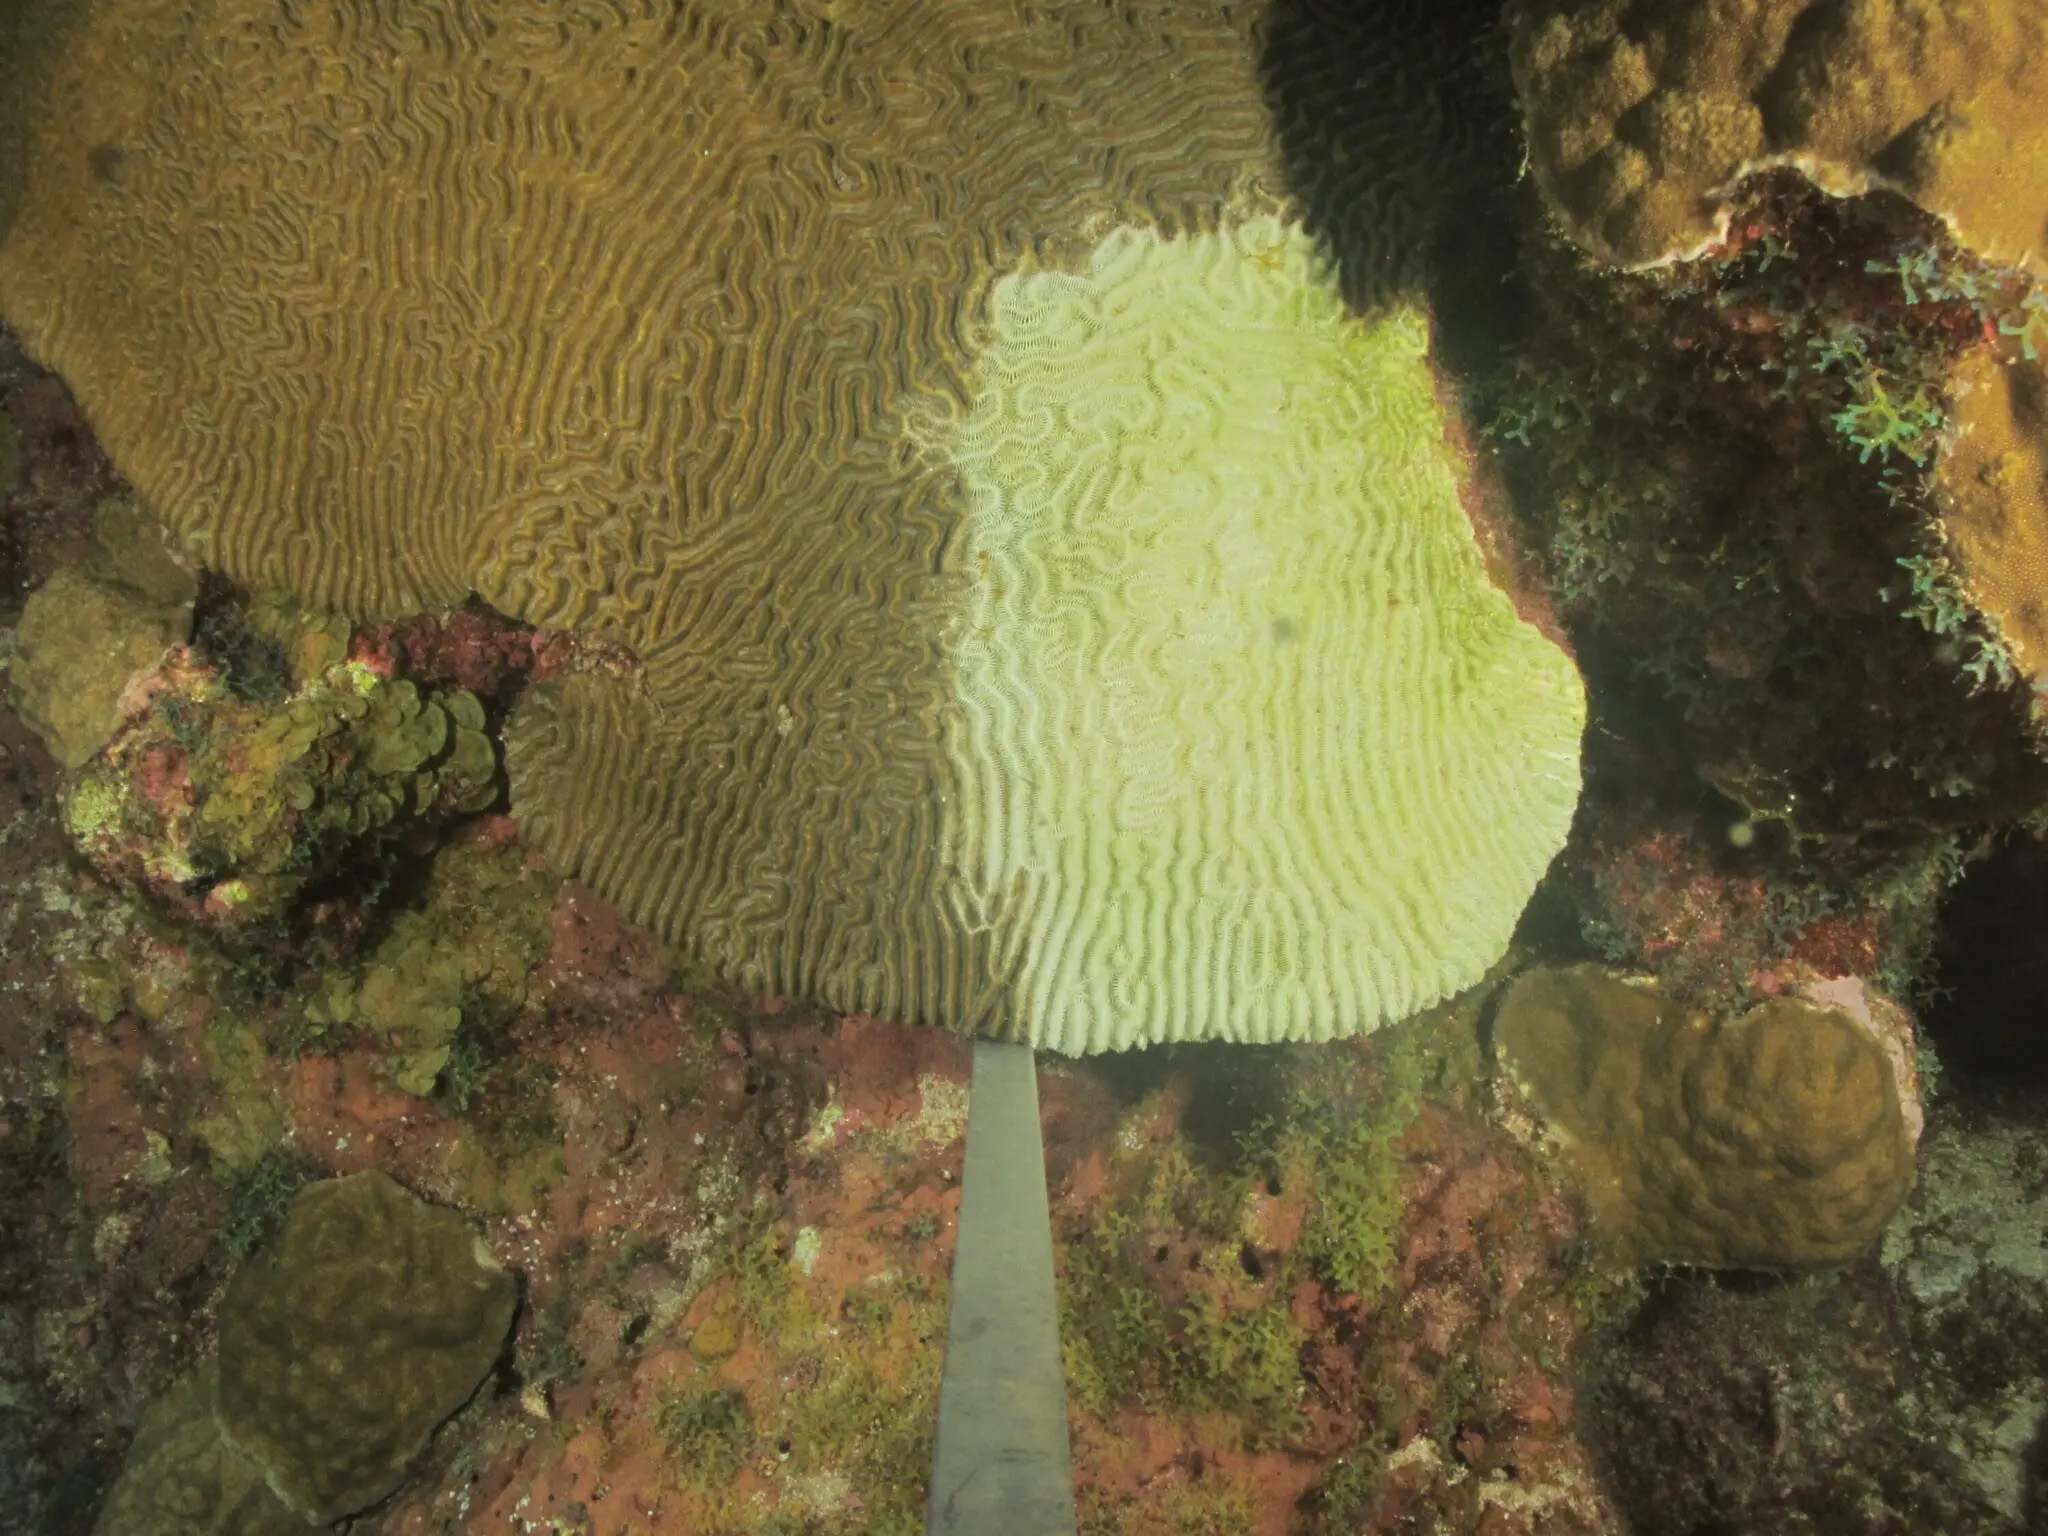 Coral is seen on the ocean floor. There is discoloration on its rocky surface.